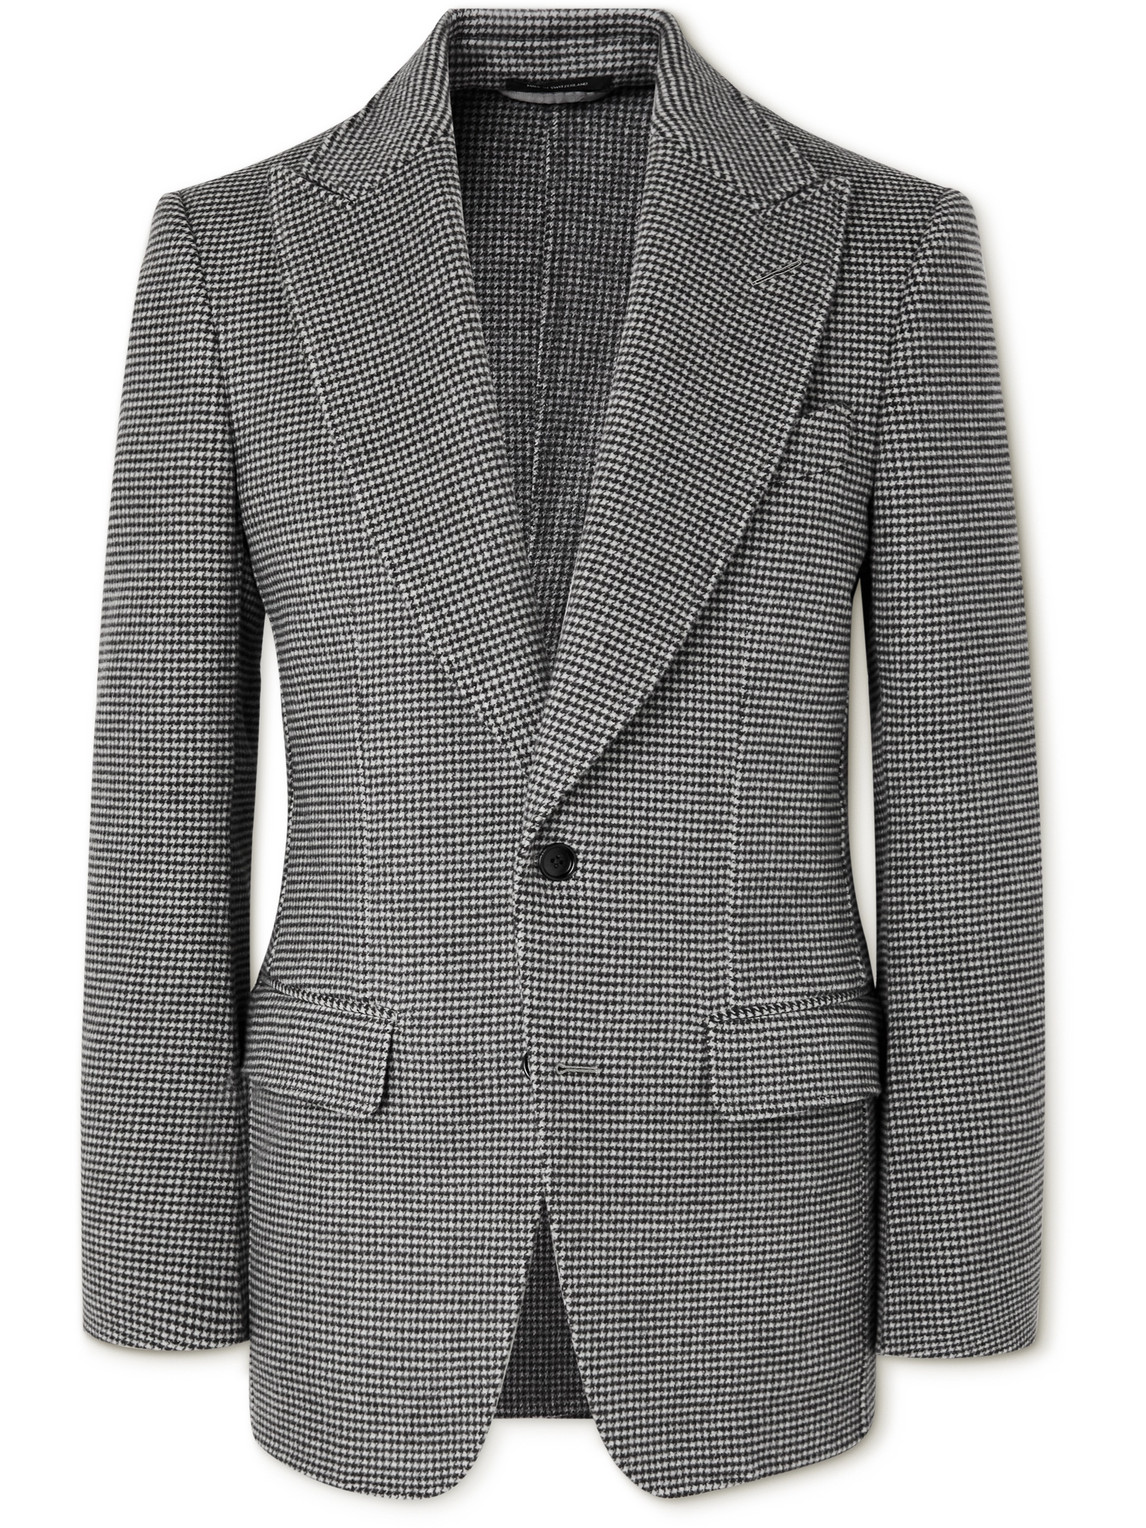 TOM FORD HOUNDSTOOTH WOOL AND CASHMERE-BLEND BLAZER